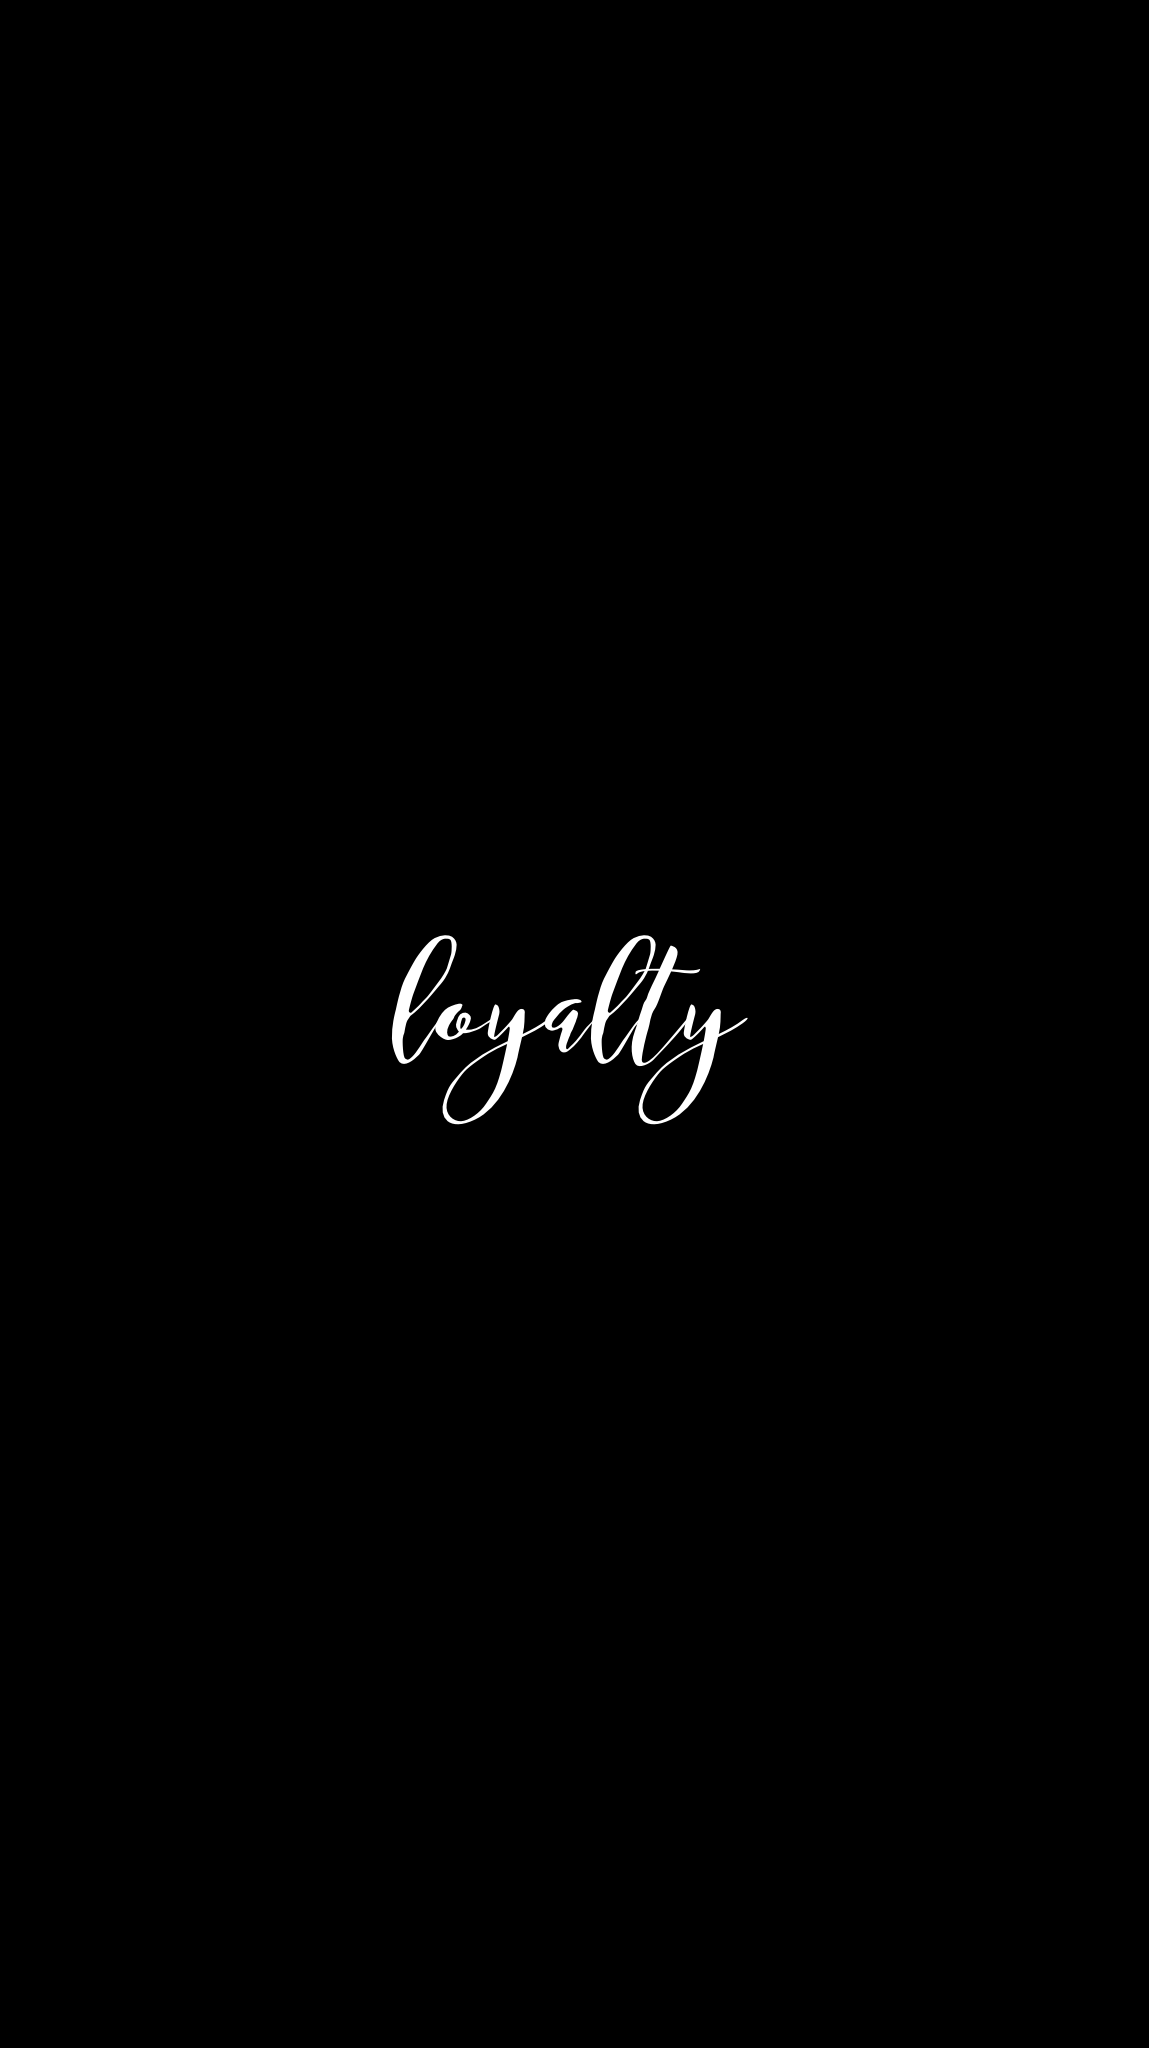 Loyalty phone wallpaper. Black background with white lettering. - Calligraphy